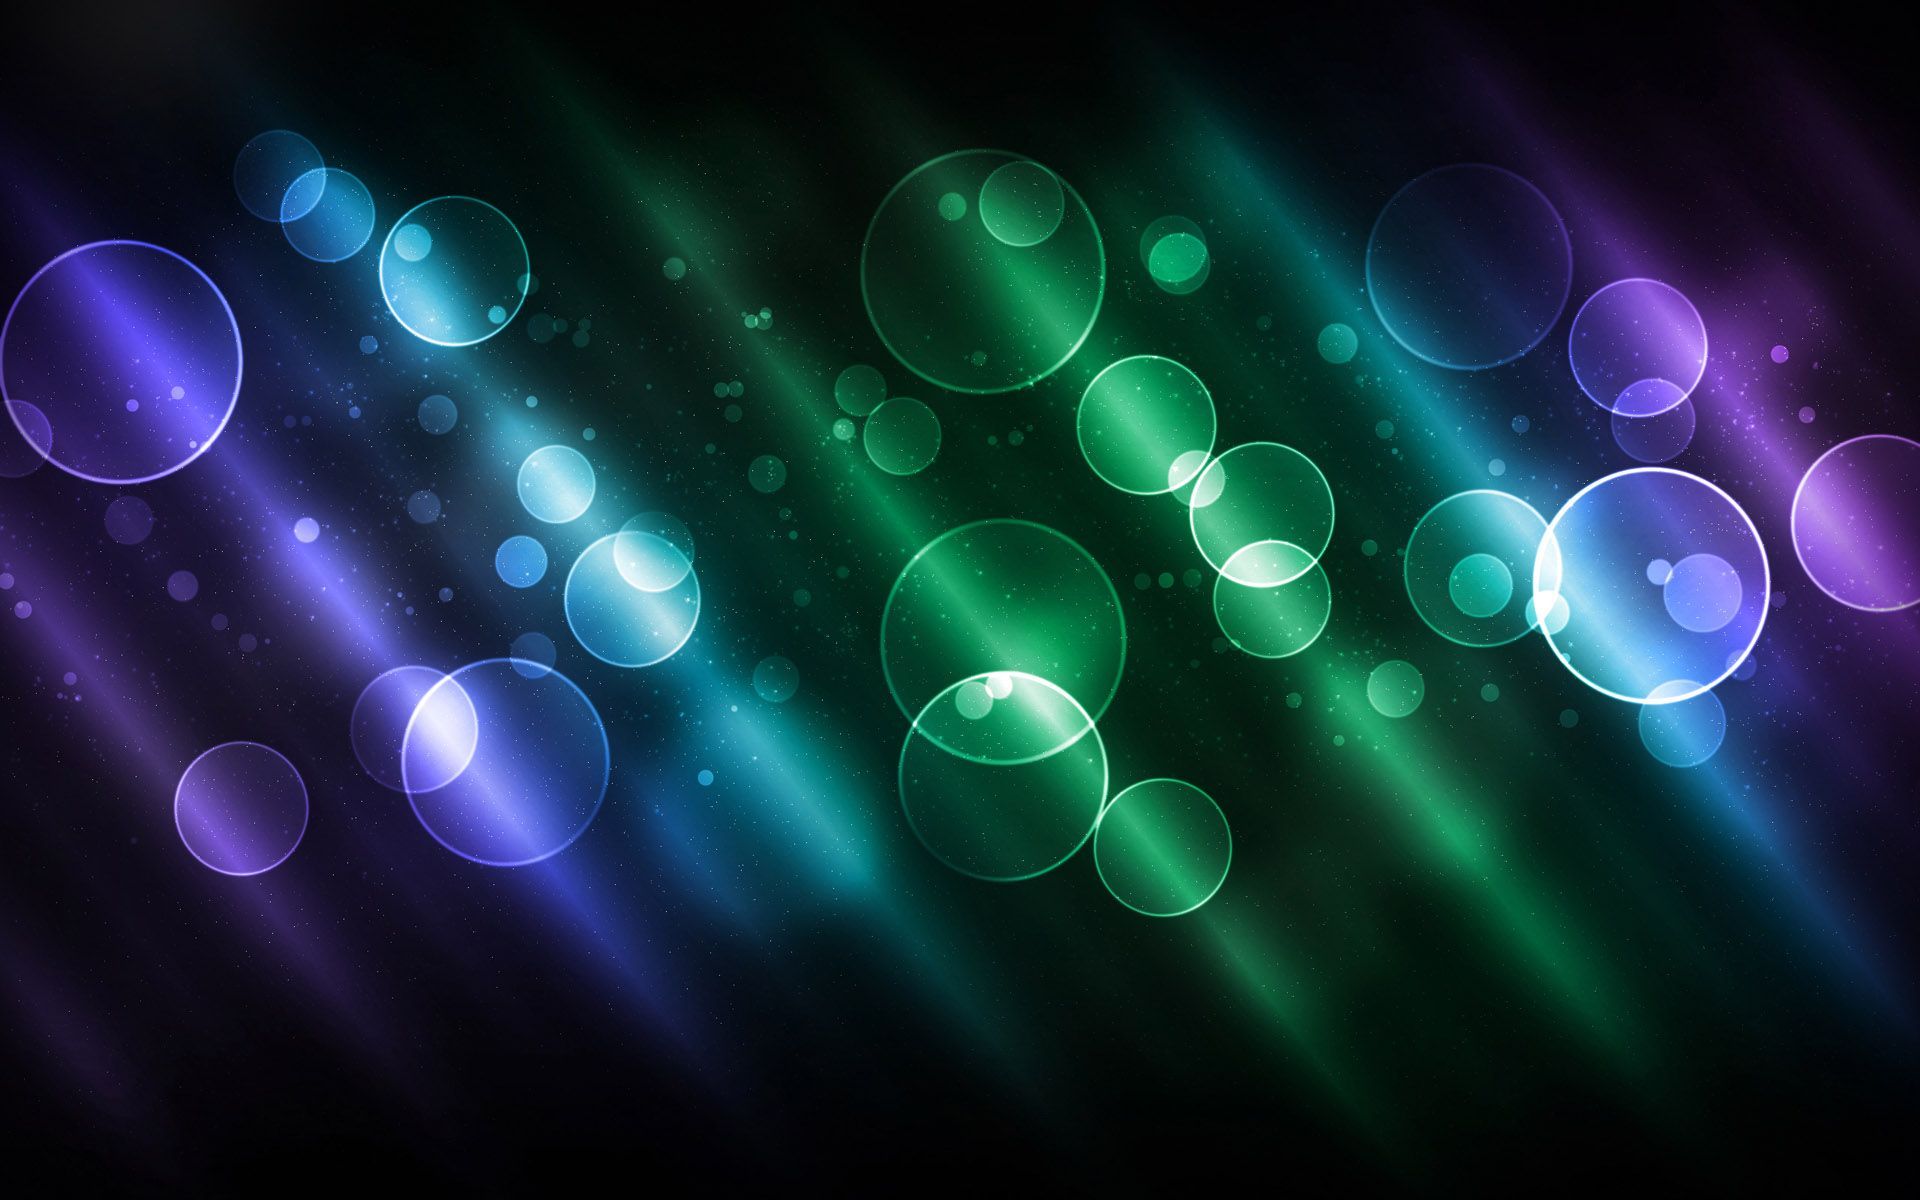 HD color background wallpaper 18527 - Background color theme